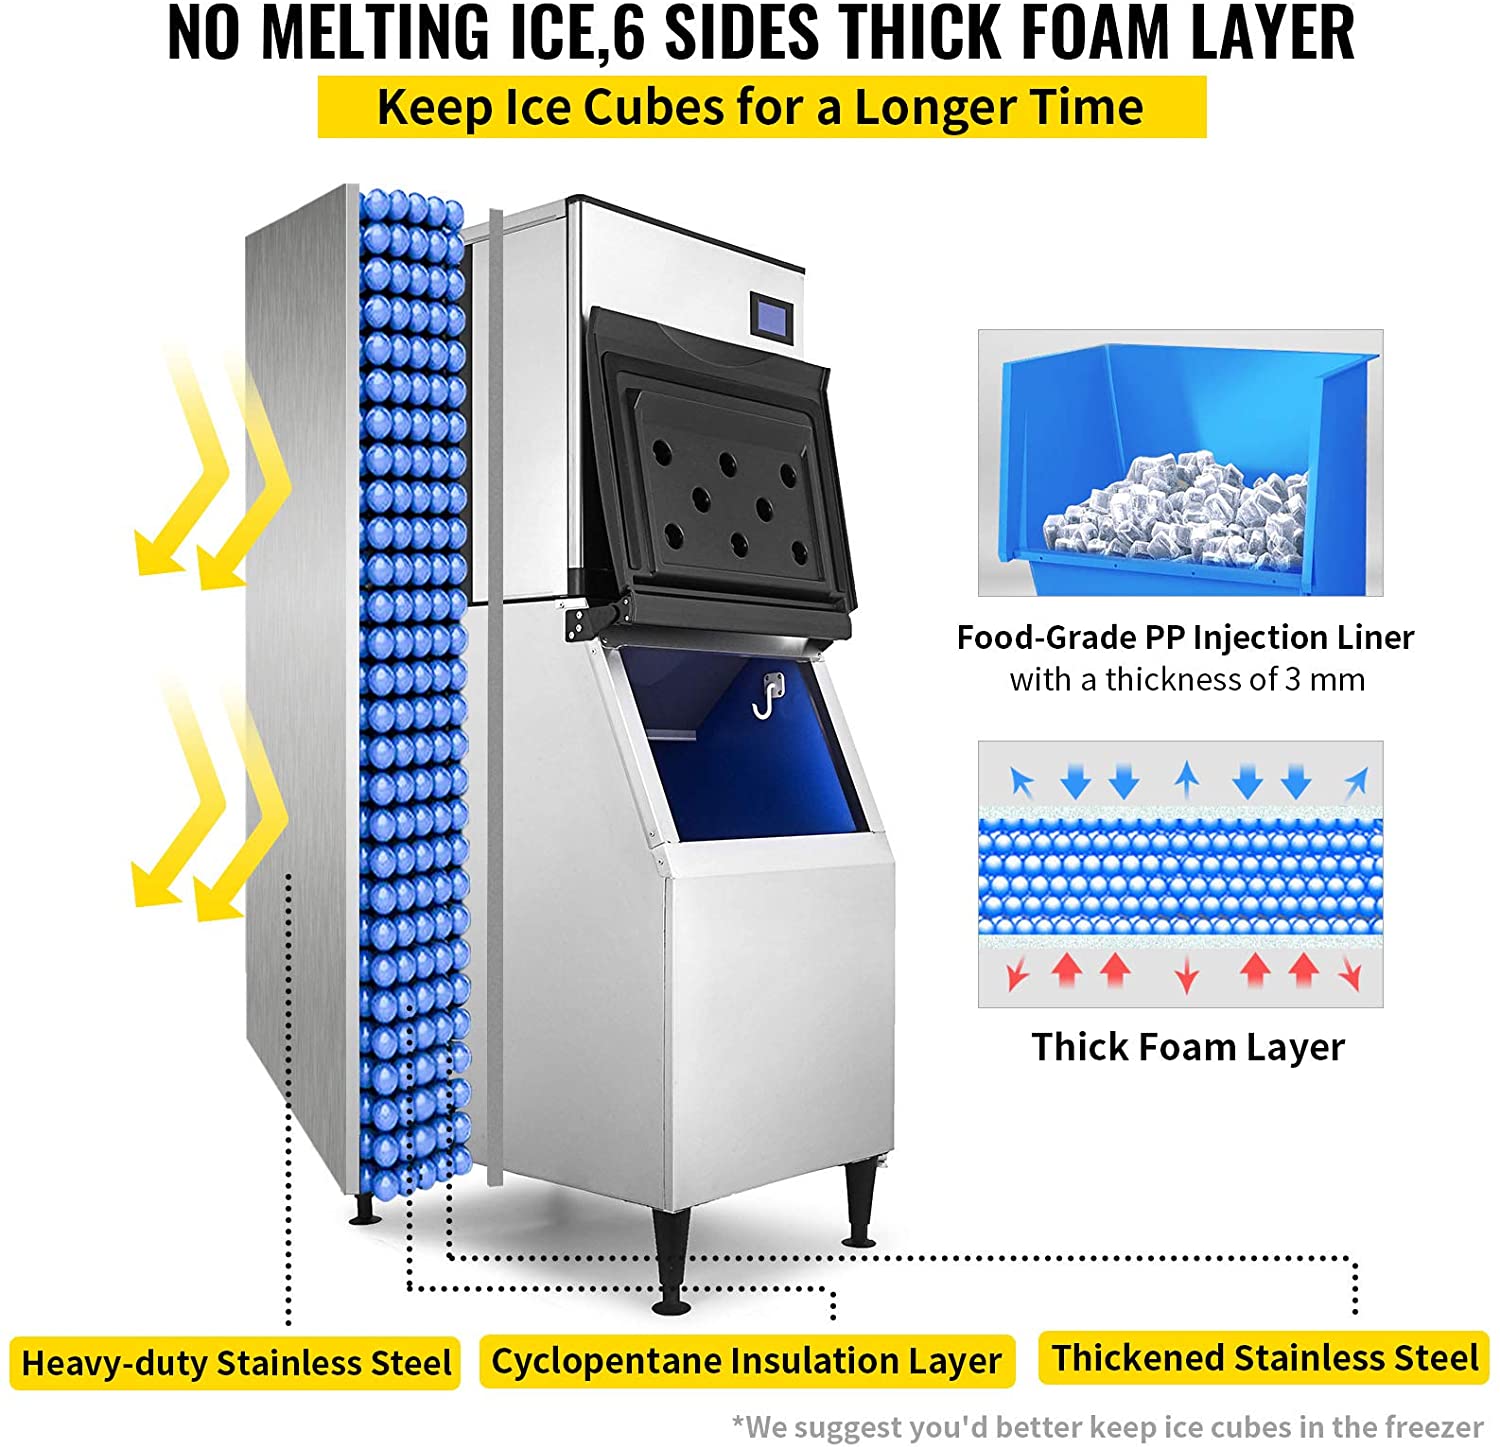 Best Commercial ICE Maker 2022: All 200 Lb,150 Lb, 300 Lb, 100 Lb, 75 Lb, 50 Lb Capacity Freestanding Ice Machine Reviews All In One Cooling Gear Lab: Any Refrigerators Air Conditioners Freezers Ice Makers Coolers Fans Reviewed And Compared.